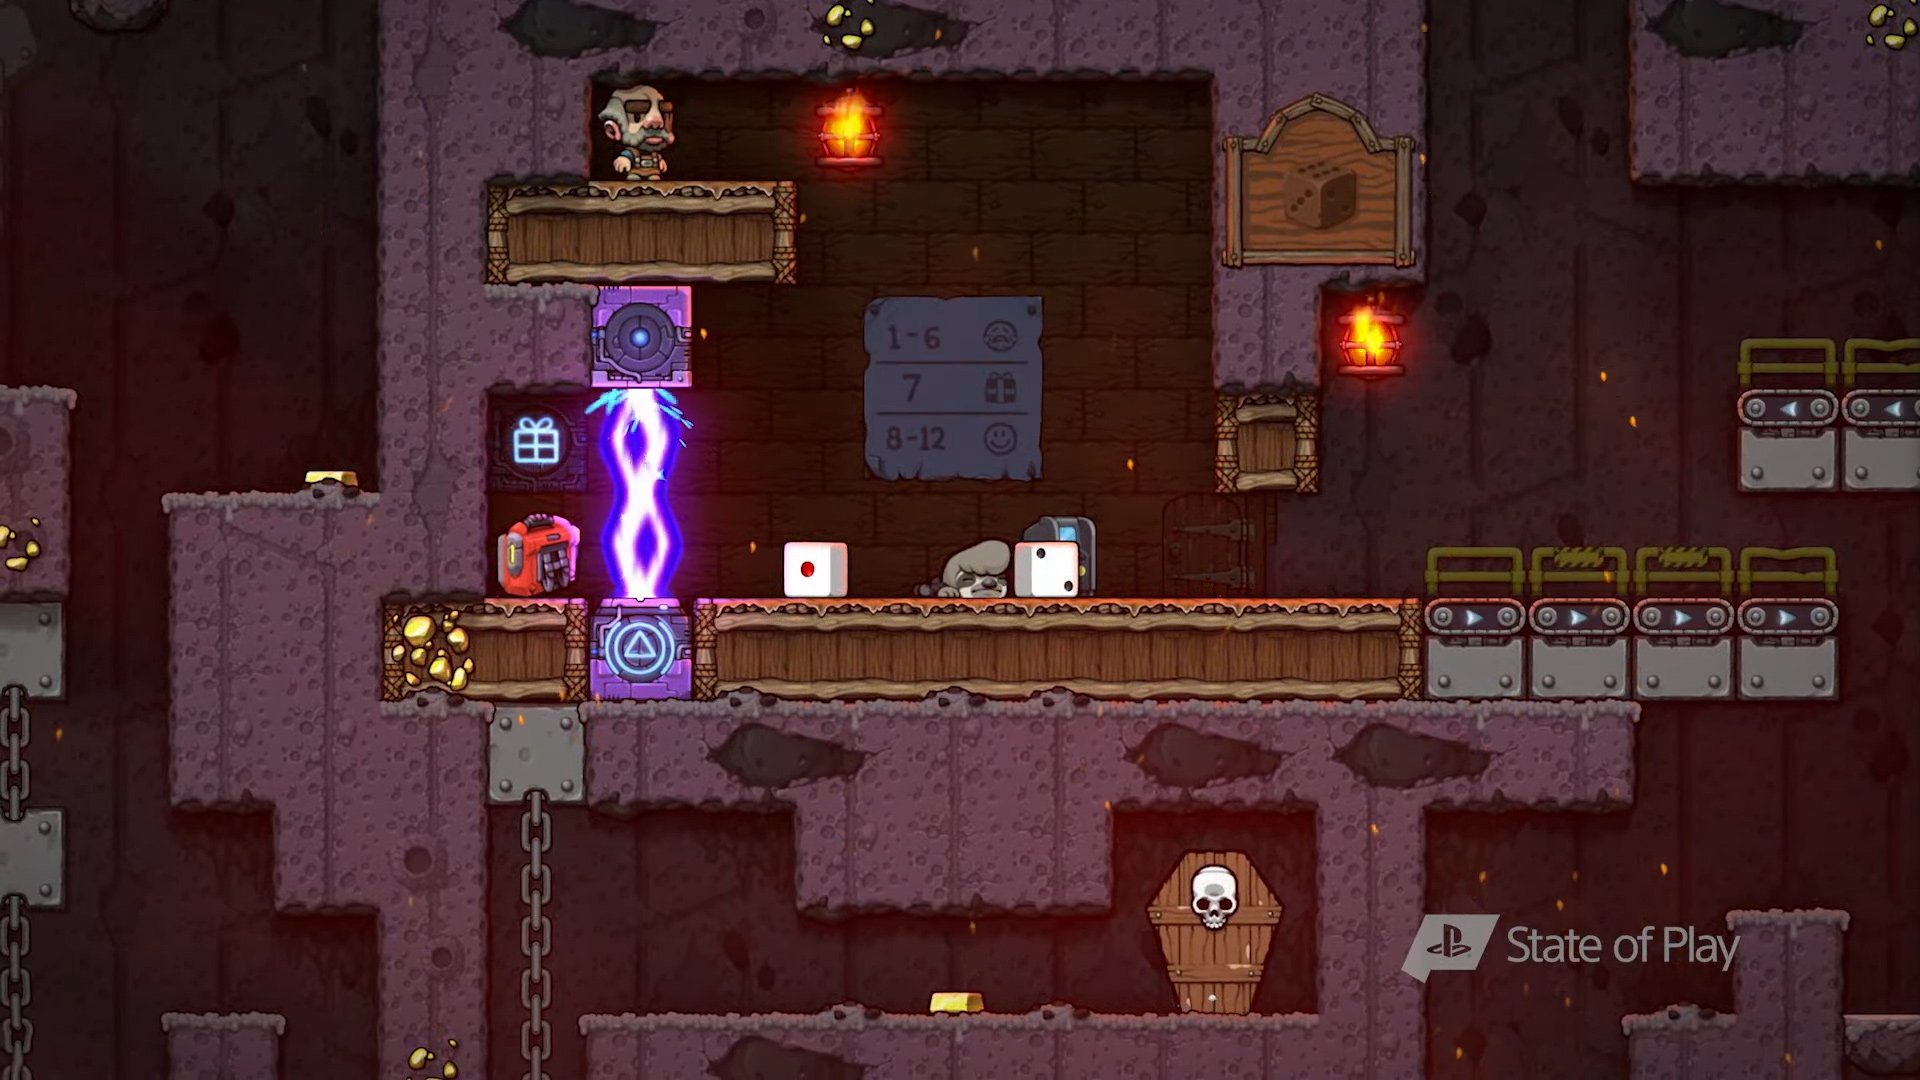 Spelunky 2 will come to Steam “shortly after” its PlayStation launch